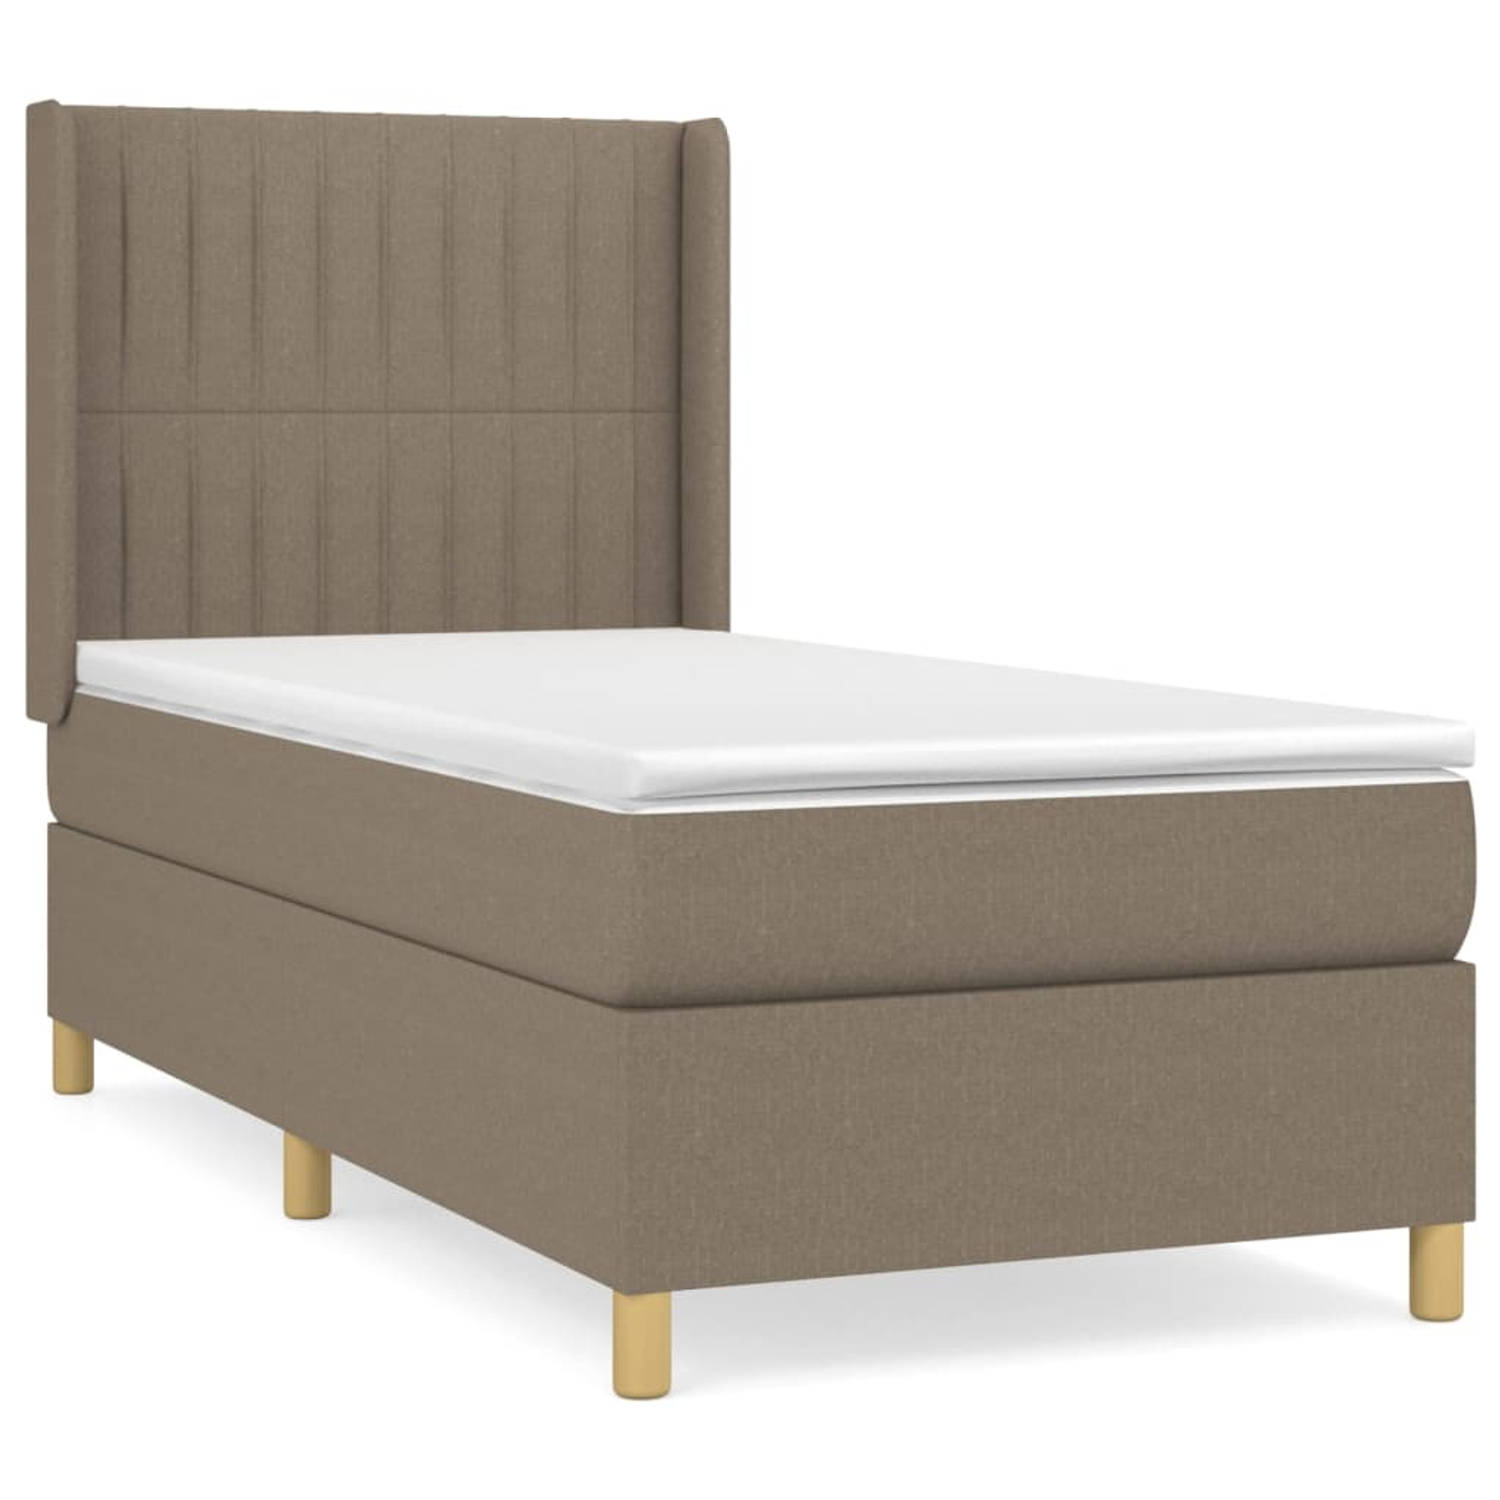 The Living Store Boxspringbed - naam - Bed - 193 x 93 x 118/128 cm - Taupe - Duurzaam en comfortabel